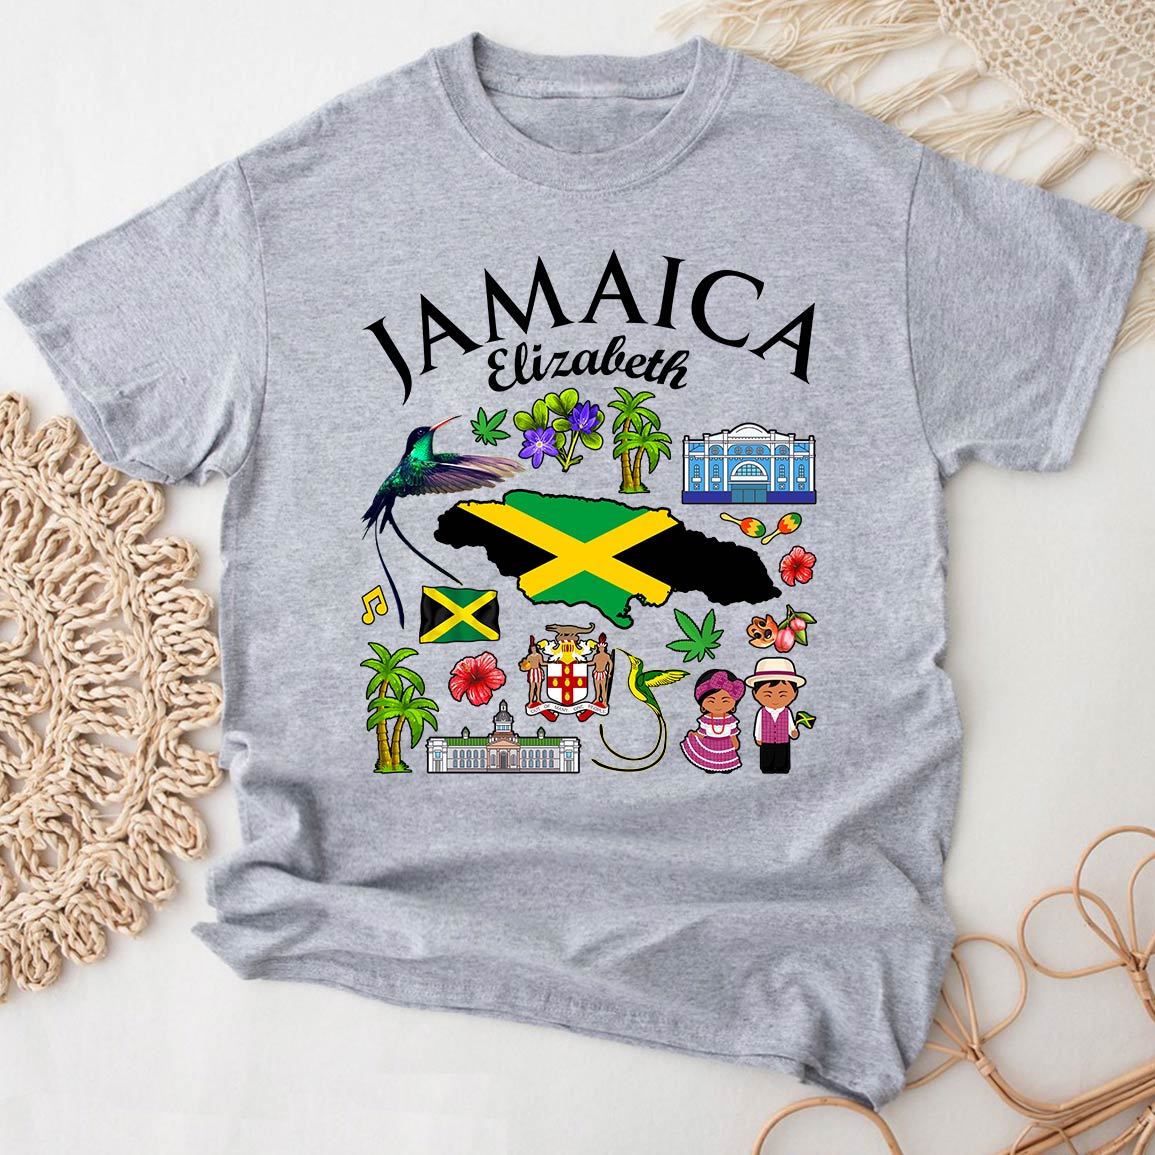 Customized Jamaica T-shirt With Symbols And Name